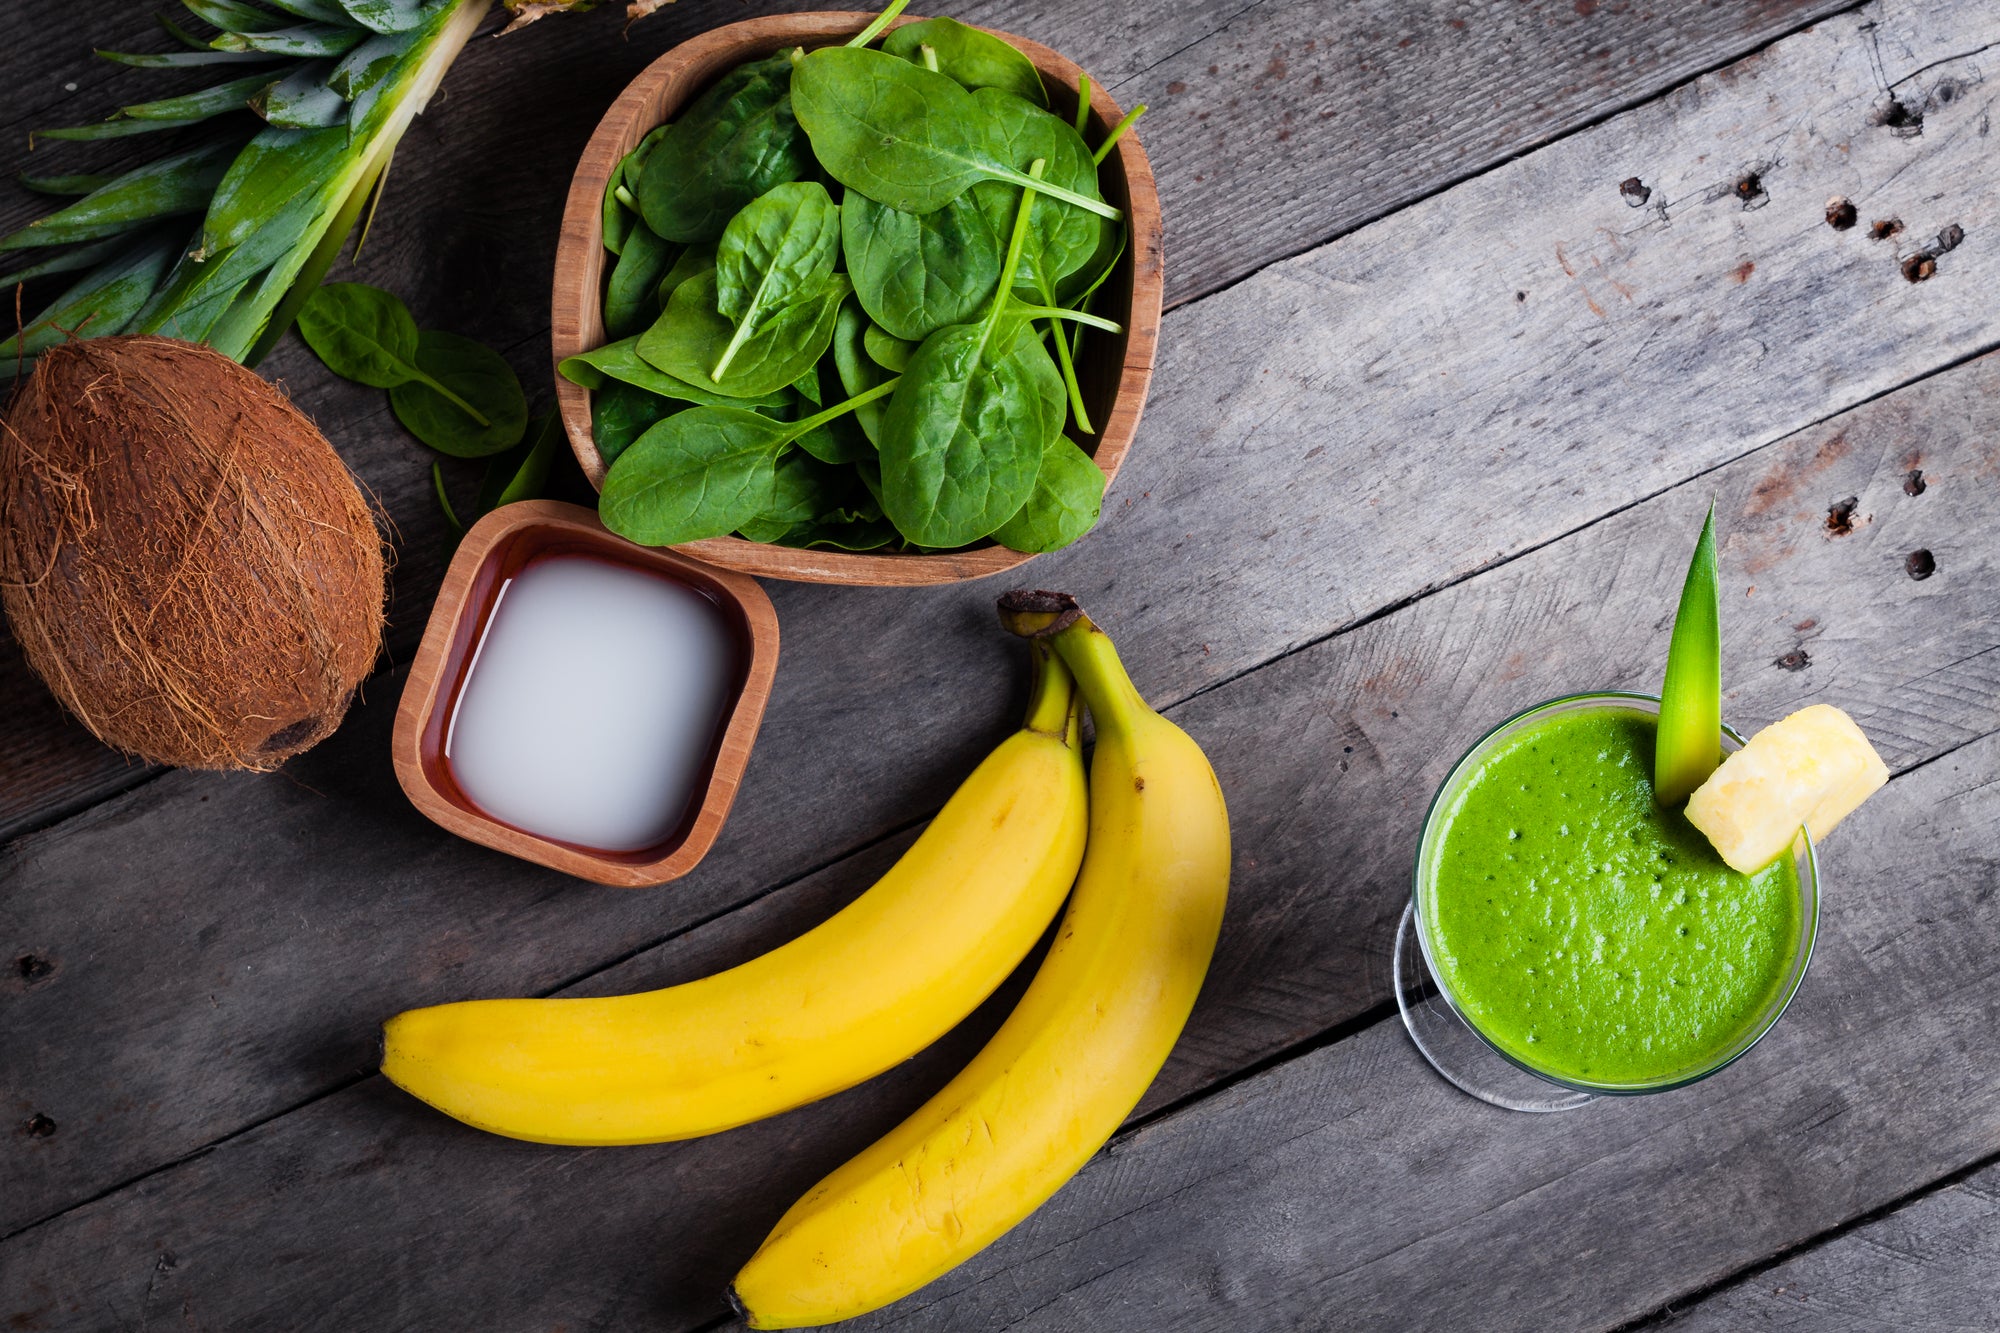 top view shot of 2 bananas, a glass of green smoothie, a bowl of spinach, 1 coconut, 1 small bowl of coconut milk, and pineapple leaf on a wooden surface.